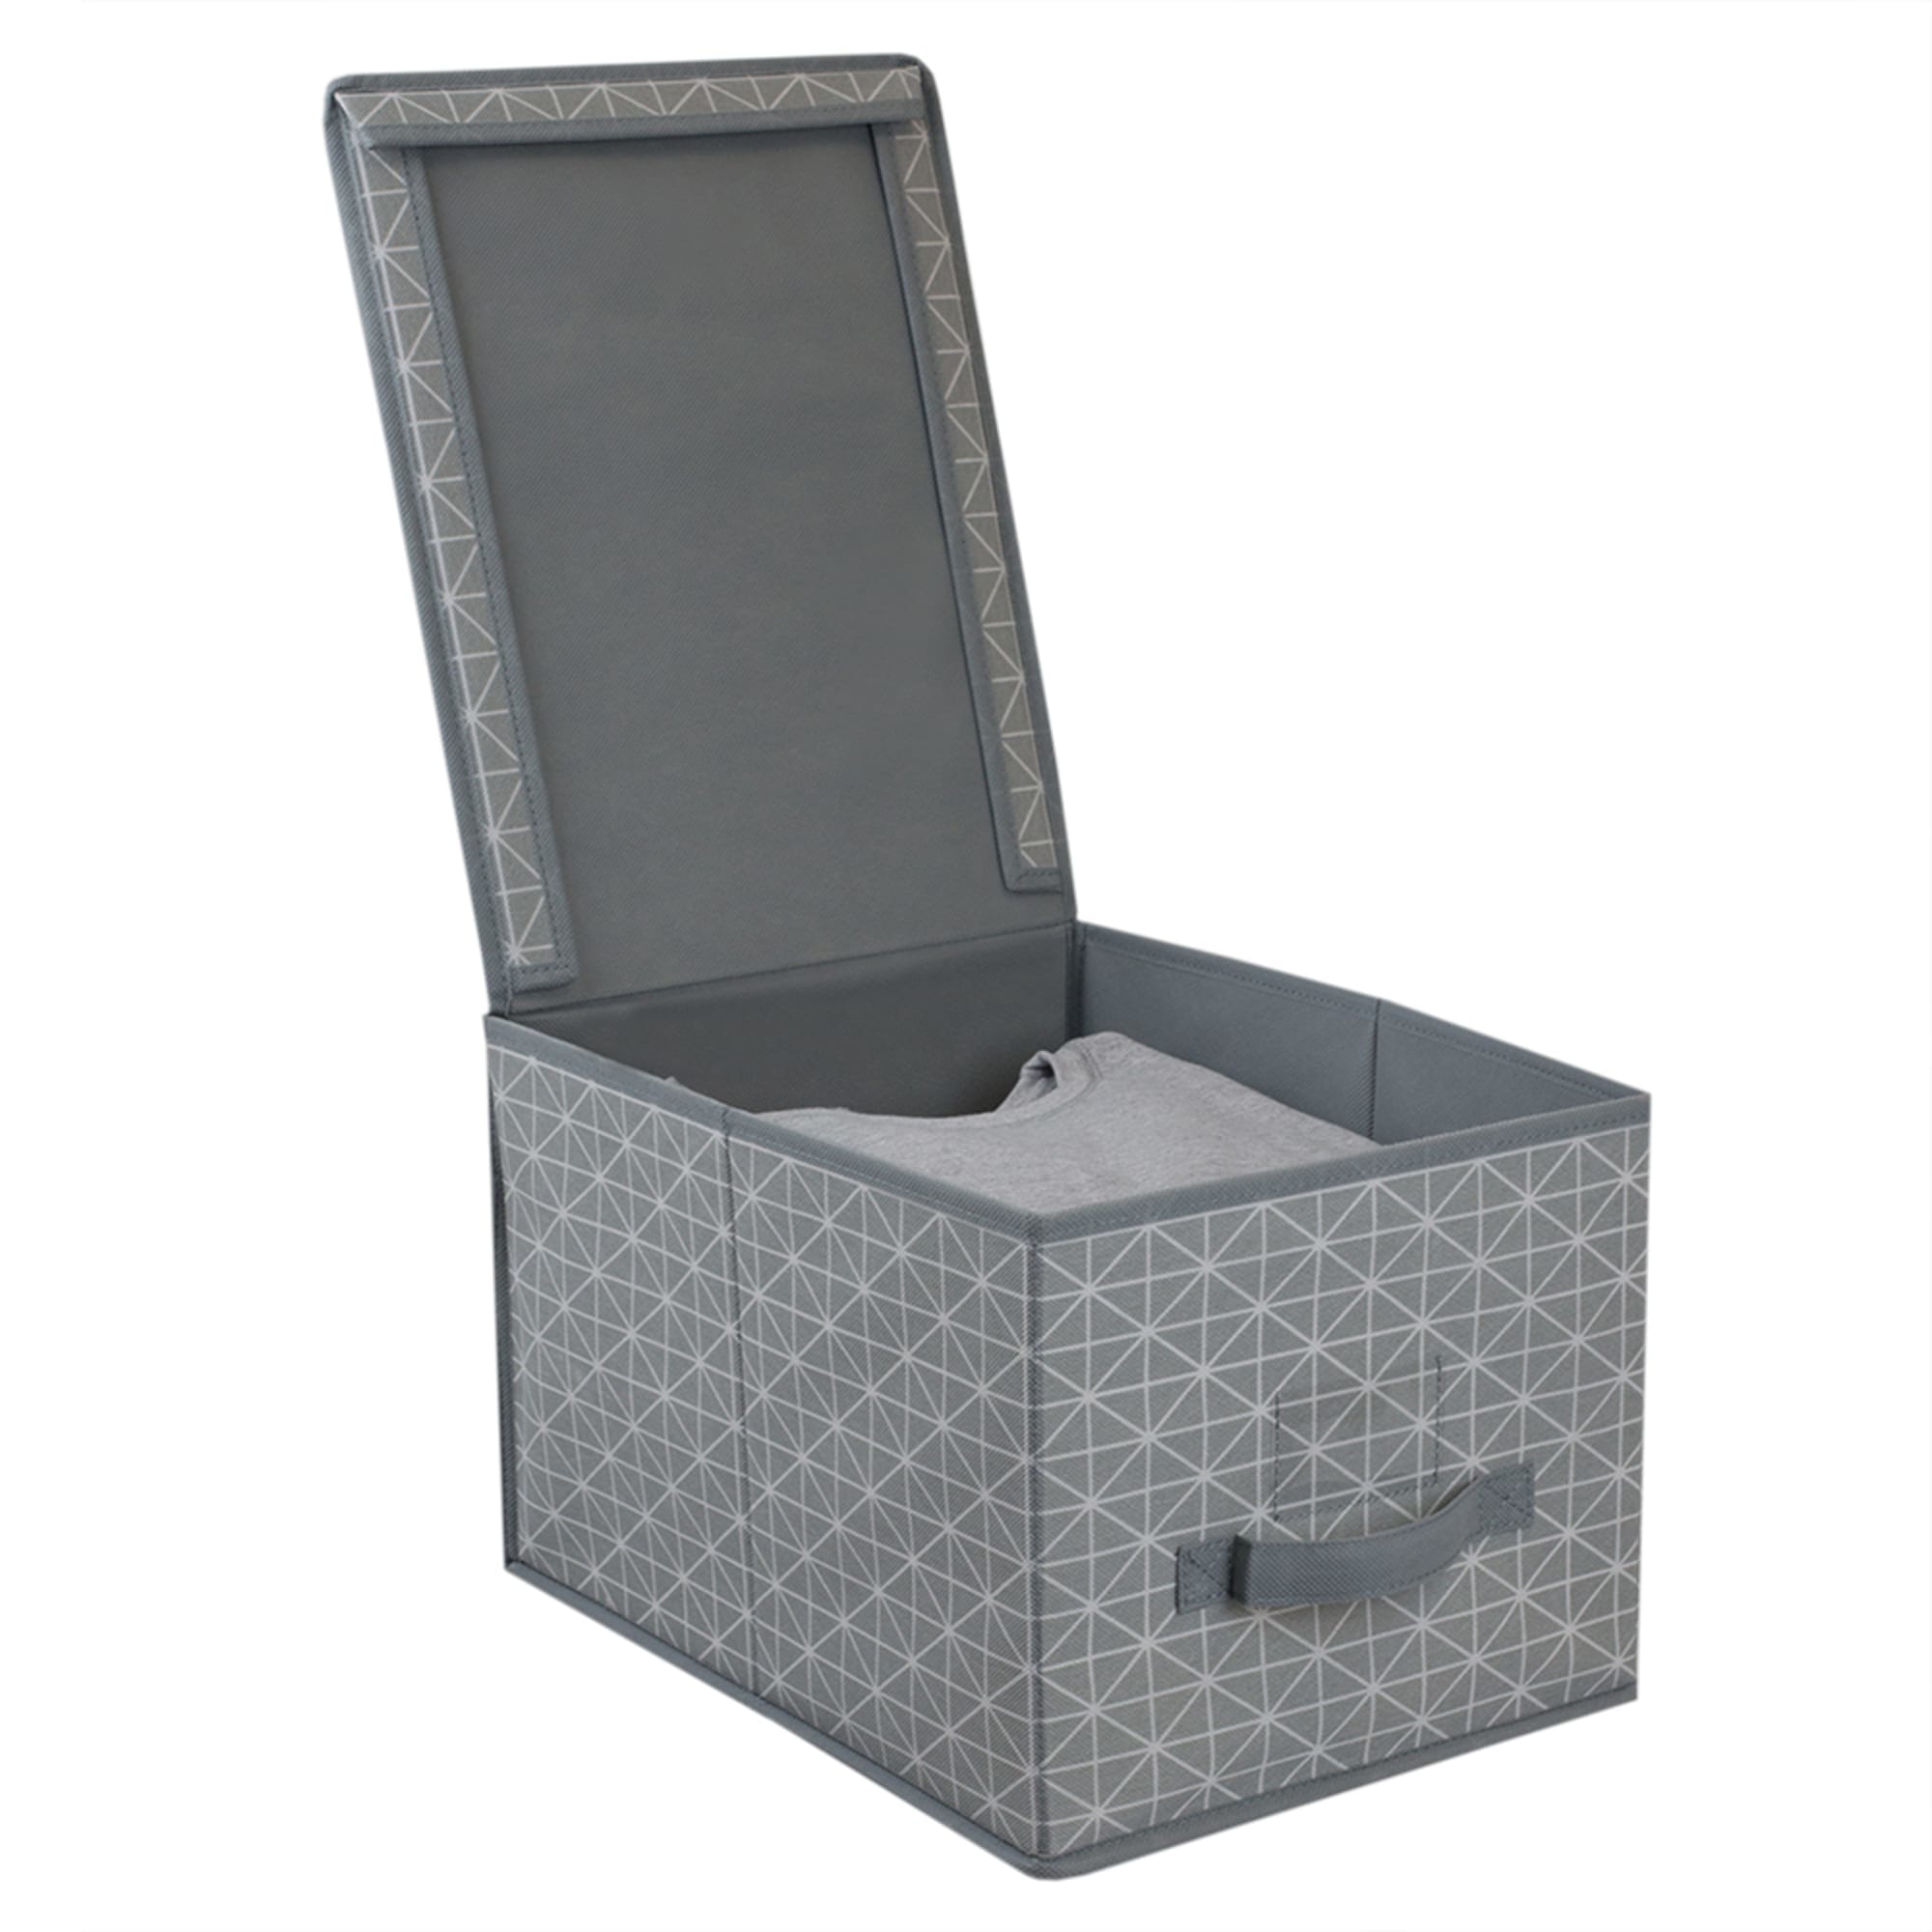 Home Basics Diamond Collection Non-Woven Storage Box, Grey $5.00 EACH, CASE PACK OF 12